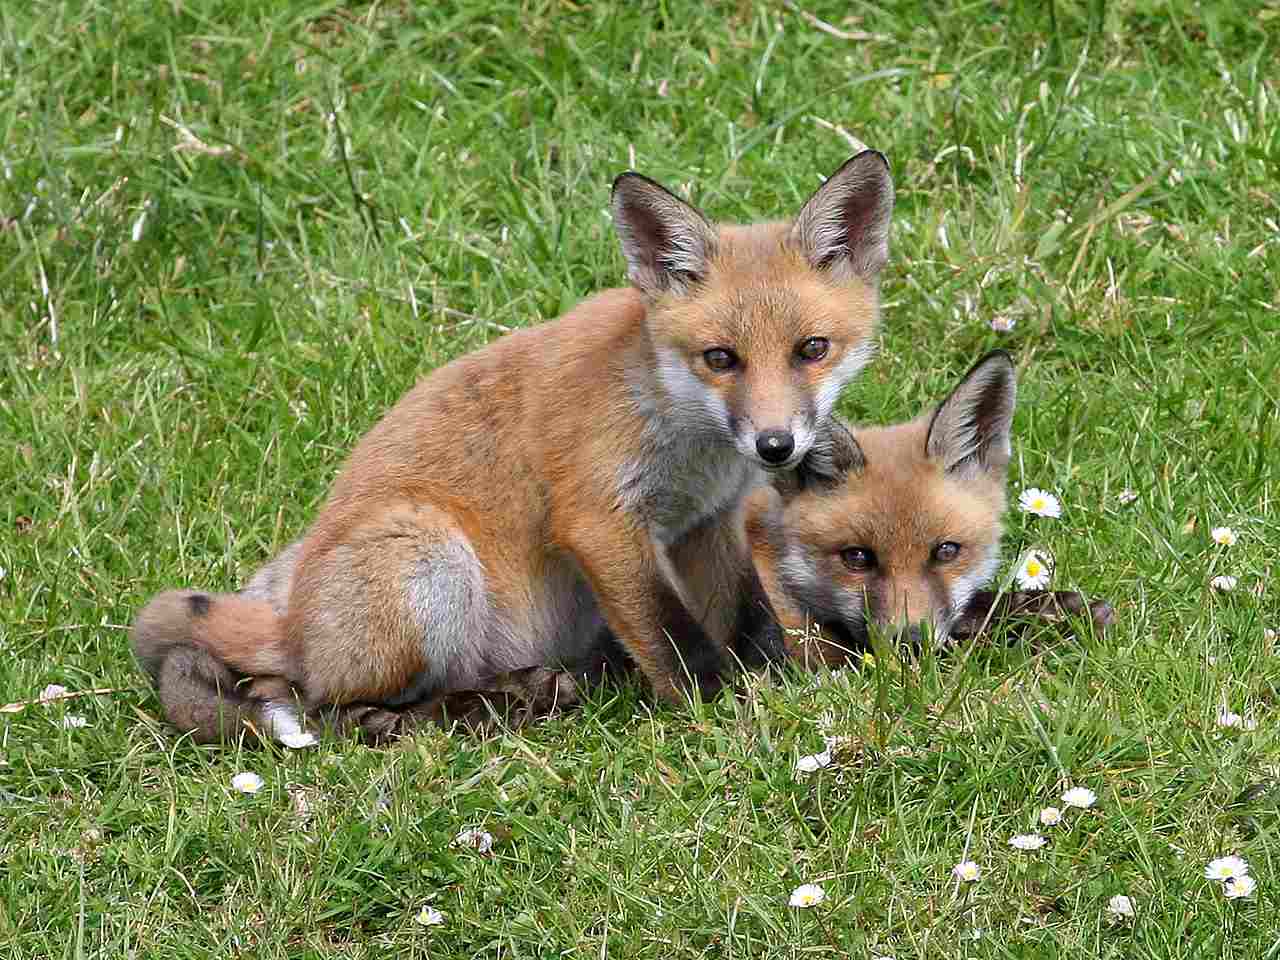 Do Hawks Eat Foxes: Exposed Juvenile Foxes are at High Risk of Predation (Credit: Ken Billington 2007 .CC BY-SA 3.0.)